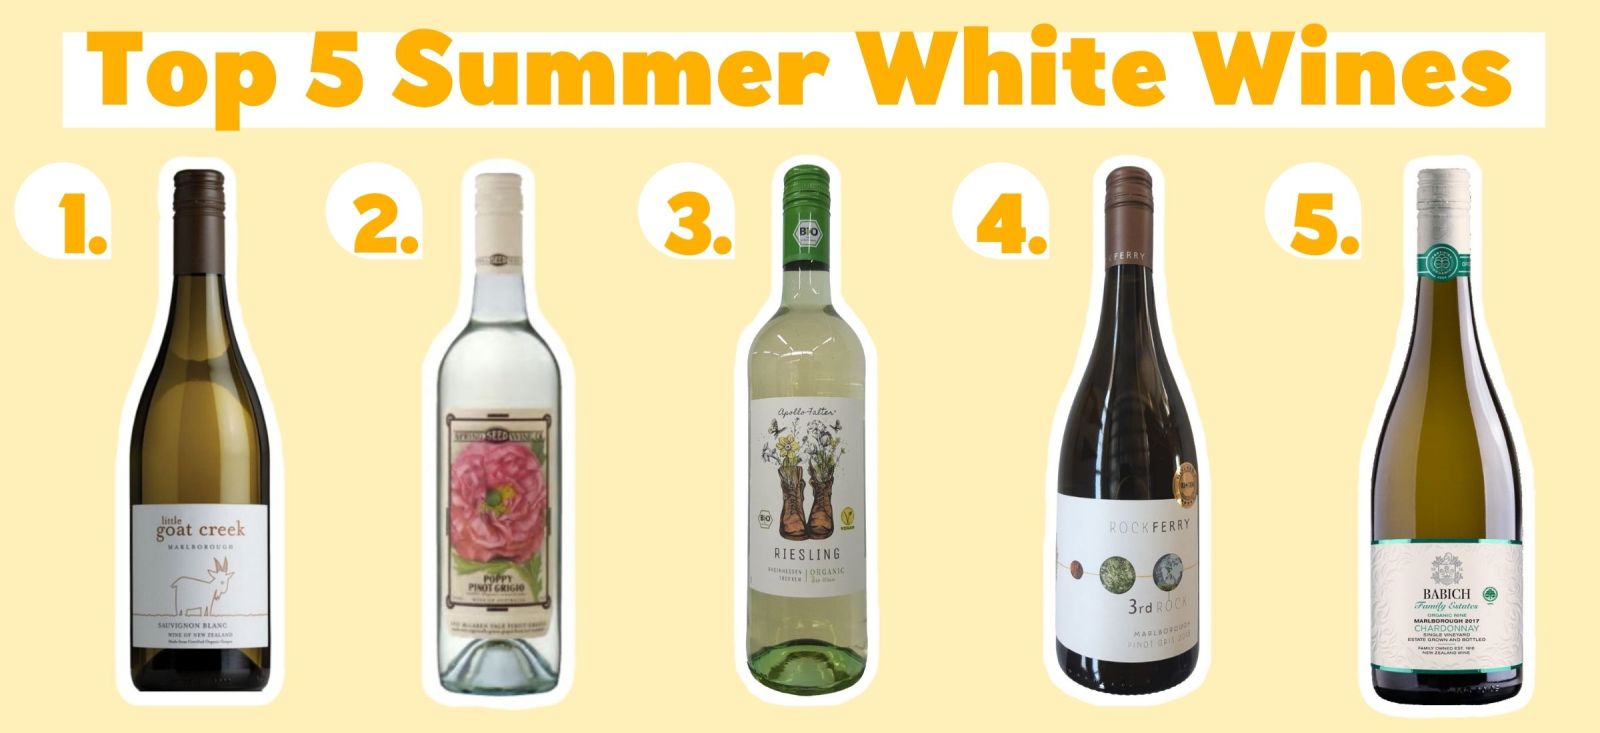 Top 5 Summer White Wines